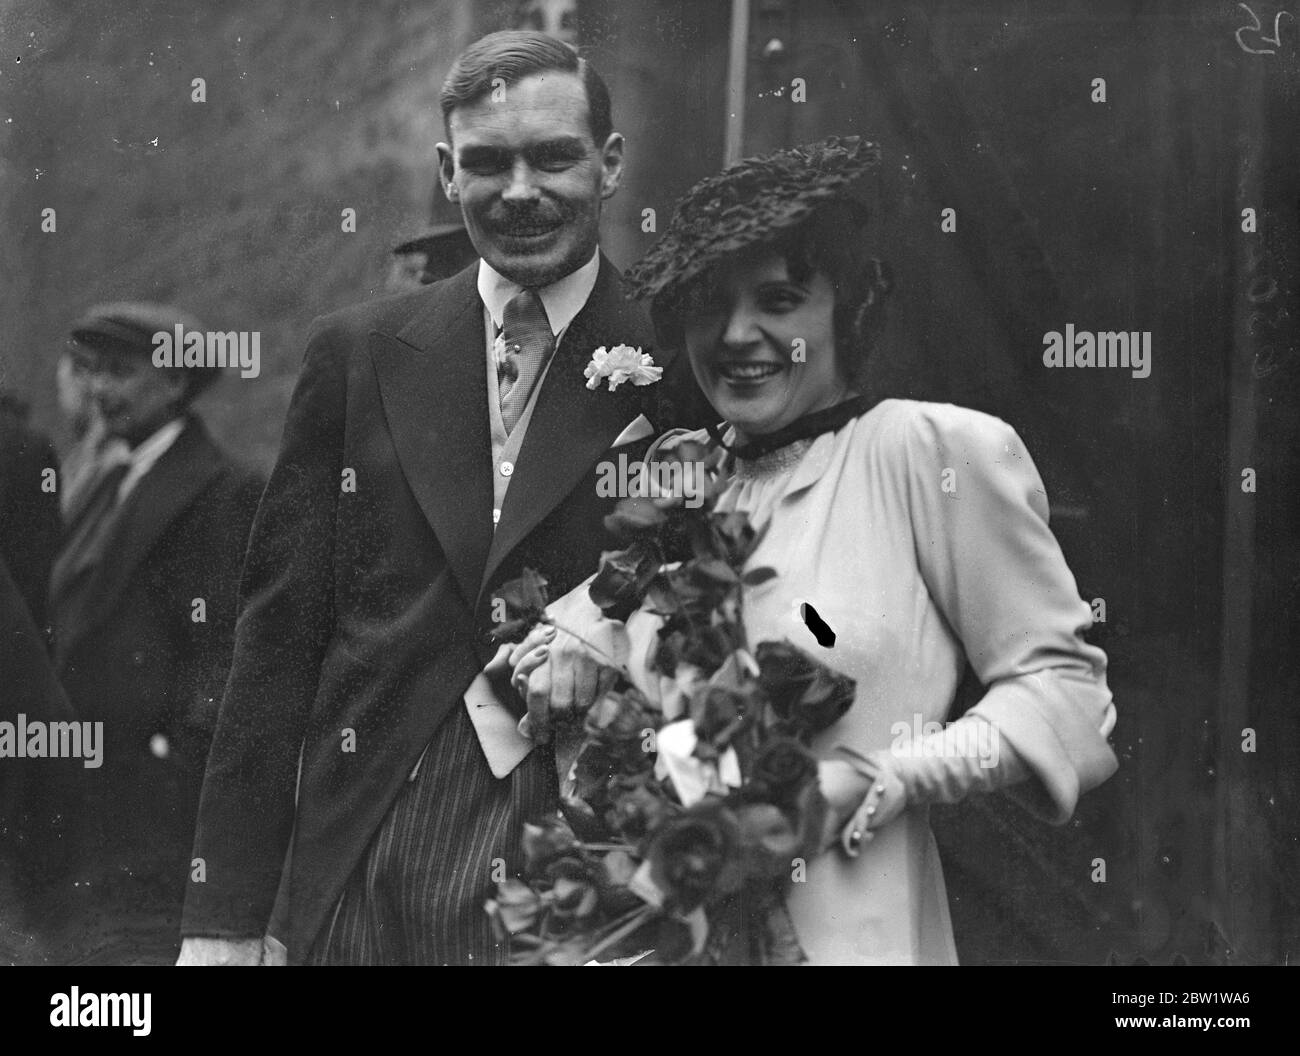 Film actress weds sheep farmer in London. Miss Claire Adams, a film actress of the silent picture days, was married at Christchurch, Down Street, to Mr Donald John Scobie Mackinnon, 32-year-old owner of a sheep farm at Mooramong, Western Victoria. The couple fell in love when they met at a cocktail party in the West End a few weeks ago. The bride, who played the lead in the several American pictures, was the widow of Mr Benjamin B. Hampton, a film producer. Photo shows: the bride and groom after the ceremony. 1 April 1937 Stock Photo